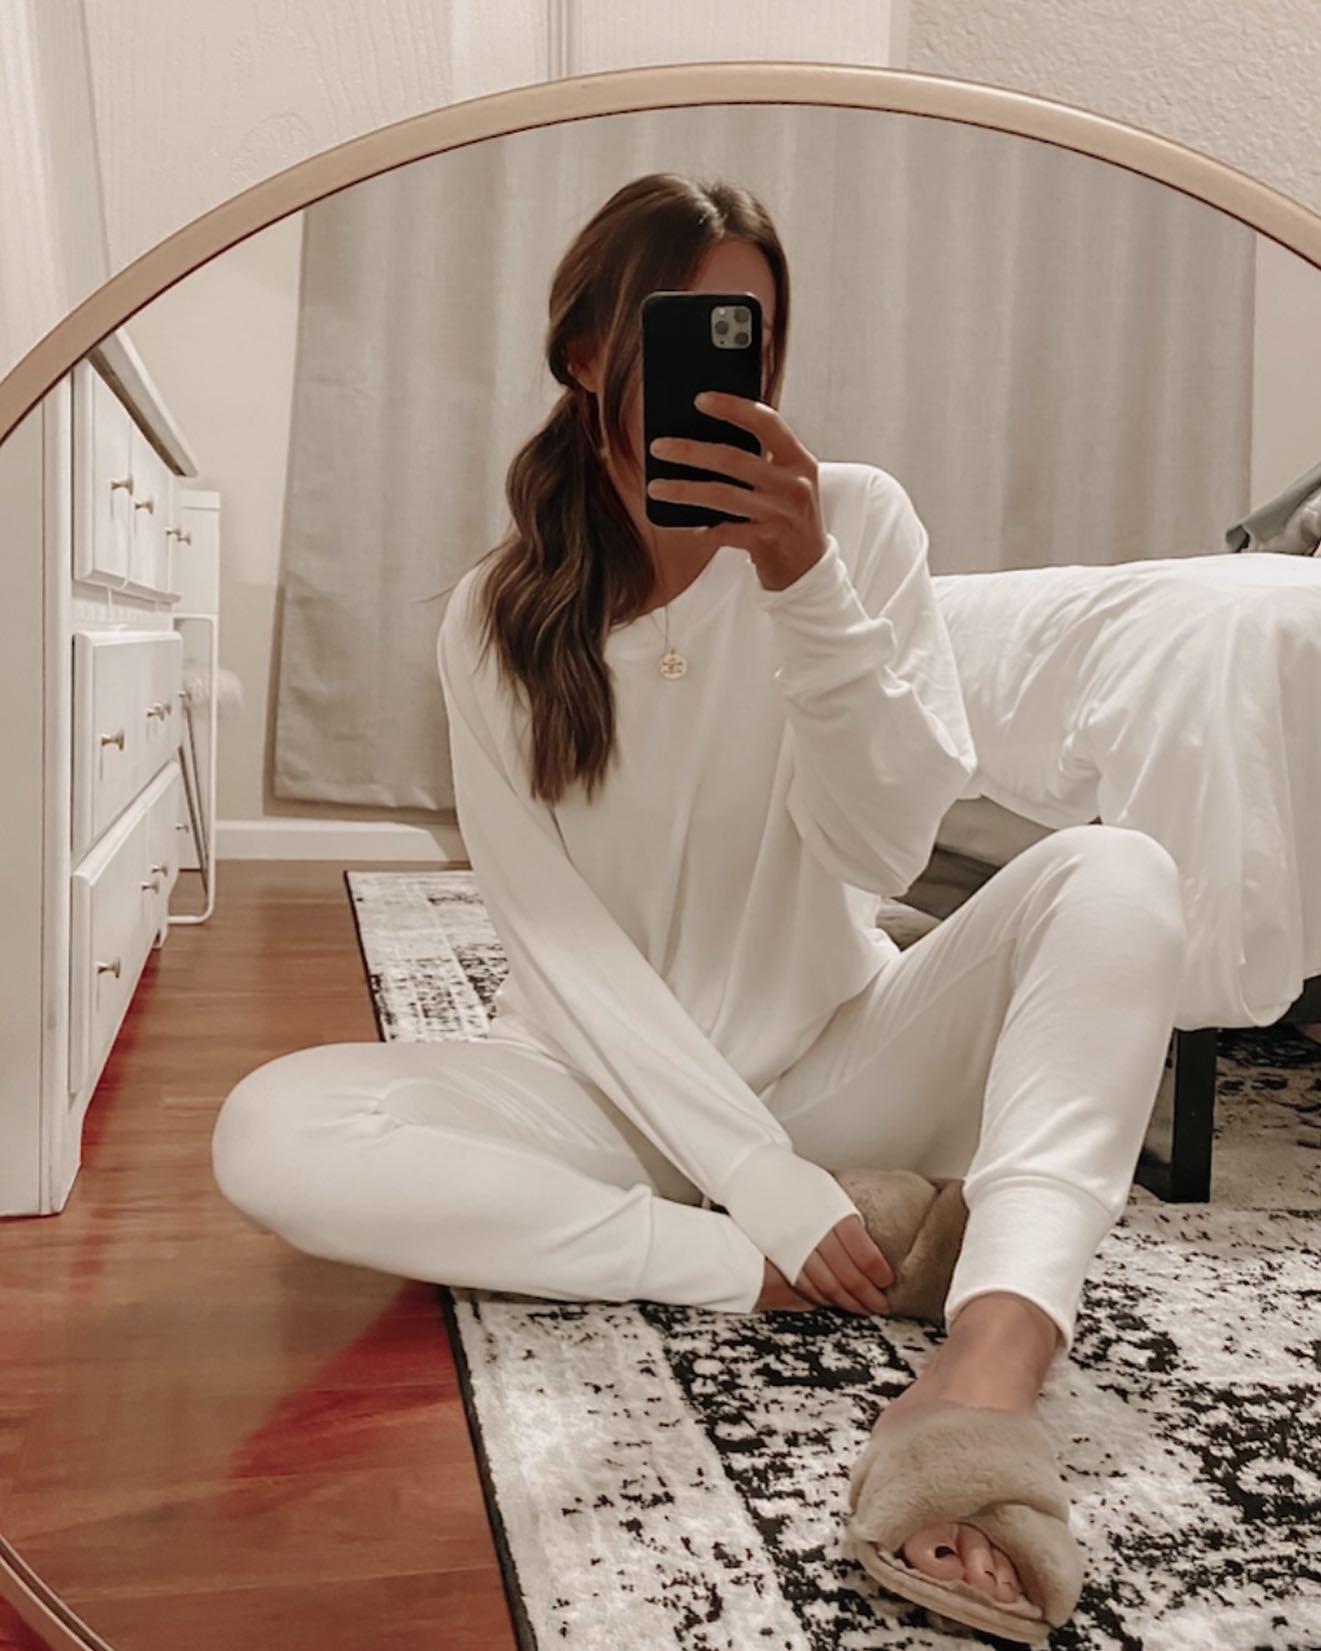 Woman taking a mirror selfie with loungewear on. Woman taking mirror pic. Woman wearing loungewear sitting on the floor.